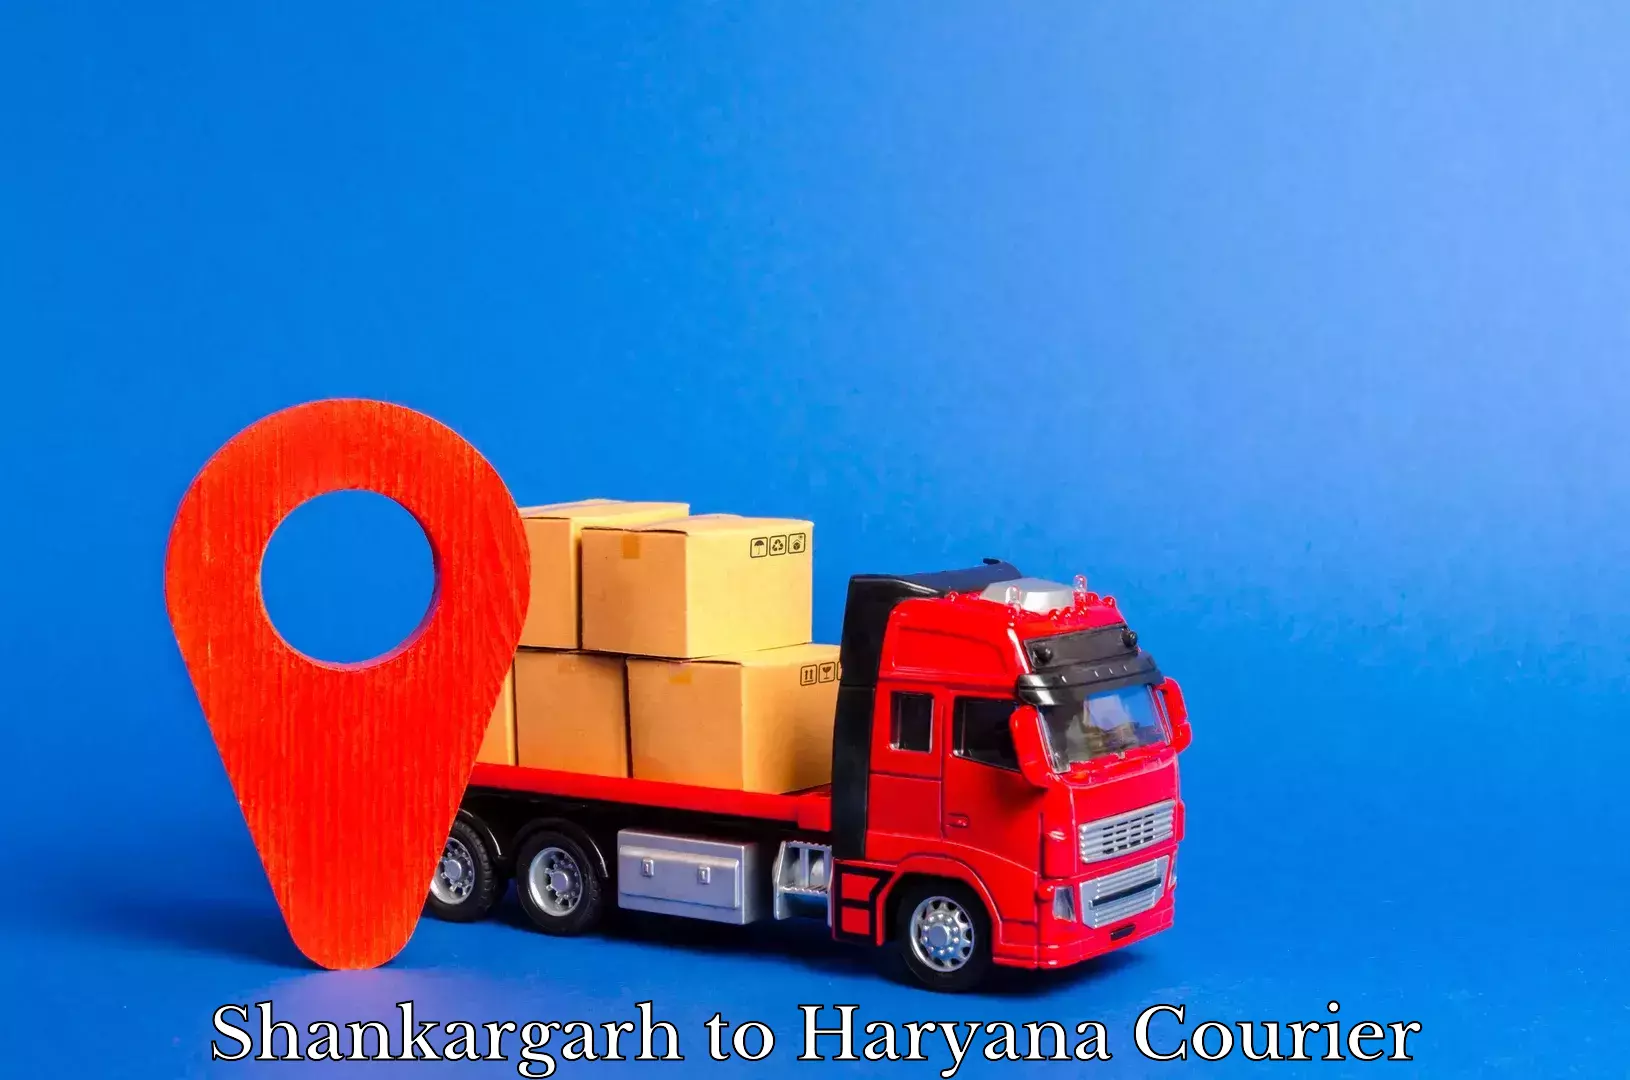 Express delivery network Shankargarh to Haryana